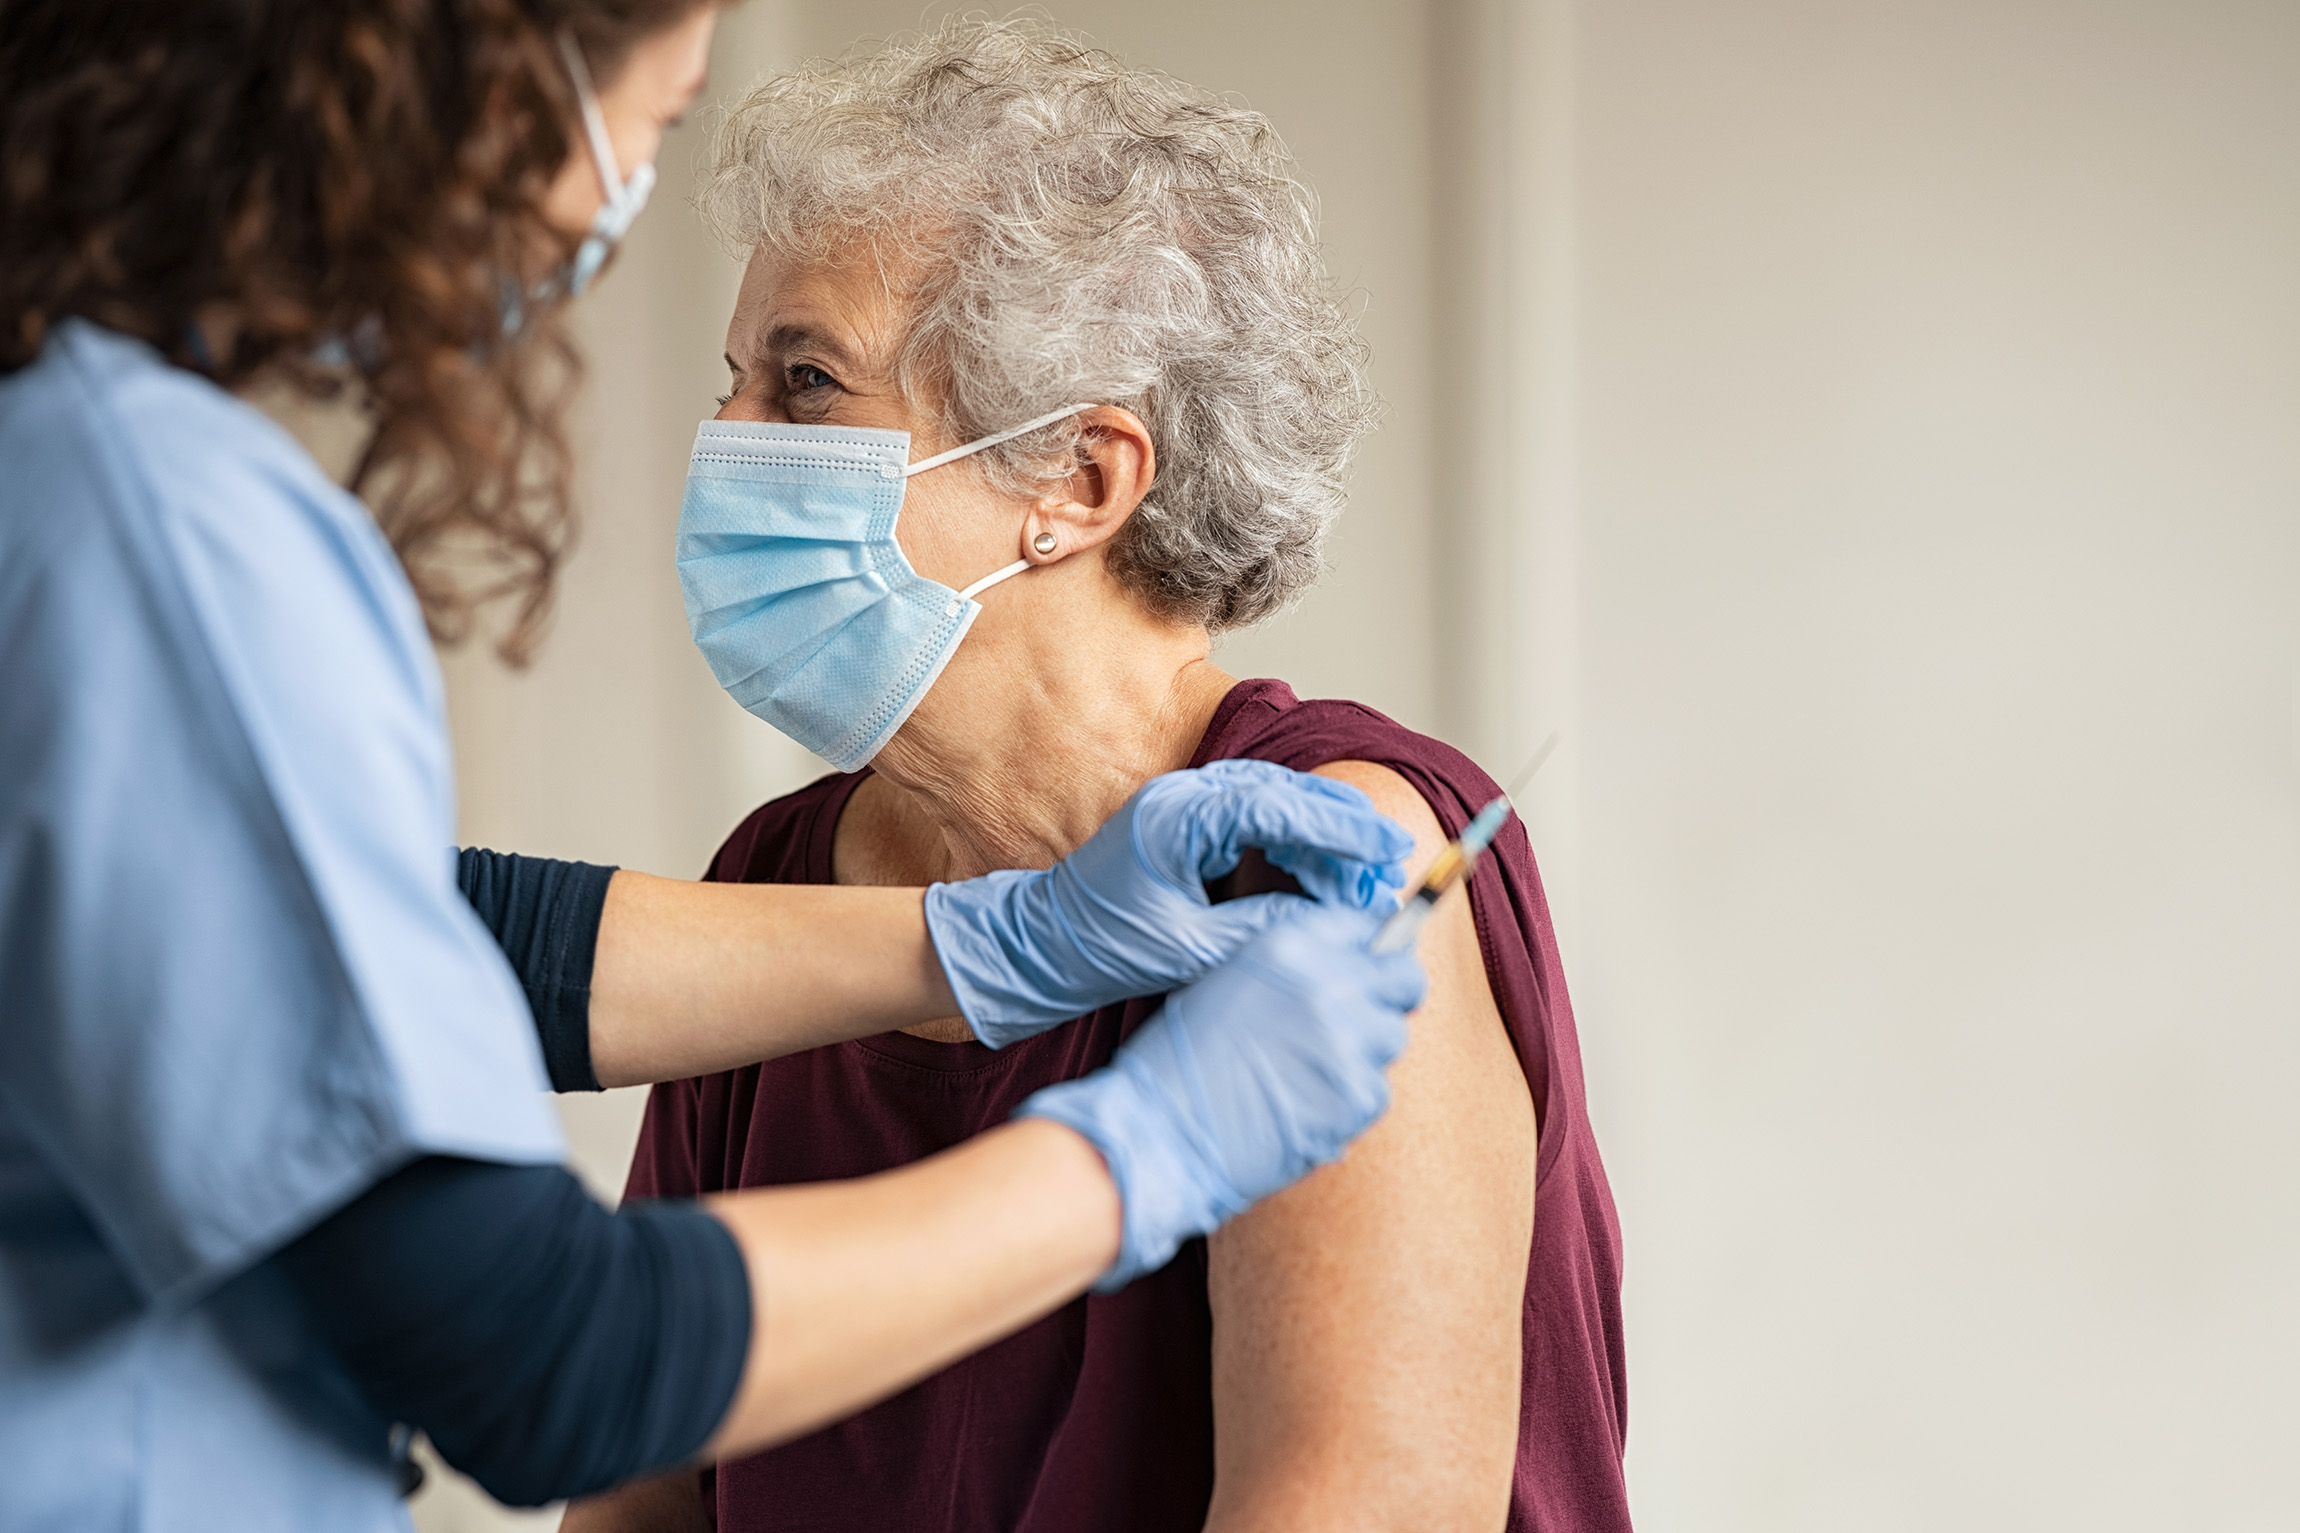 Important Vaccinations For Those Aged 65+ To Keep You Well This Winter